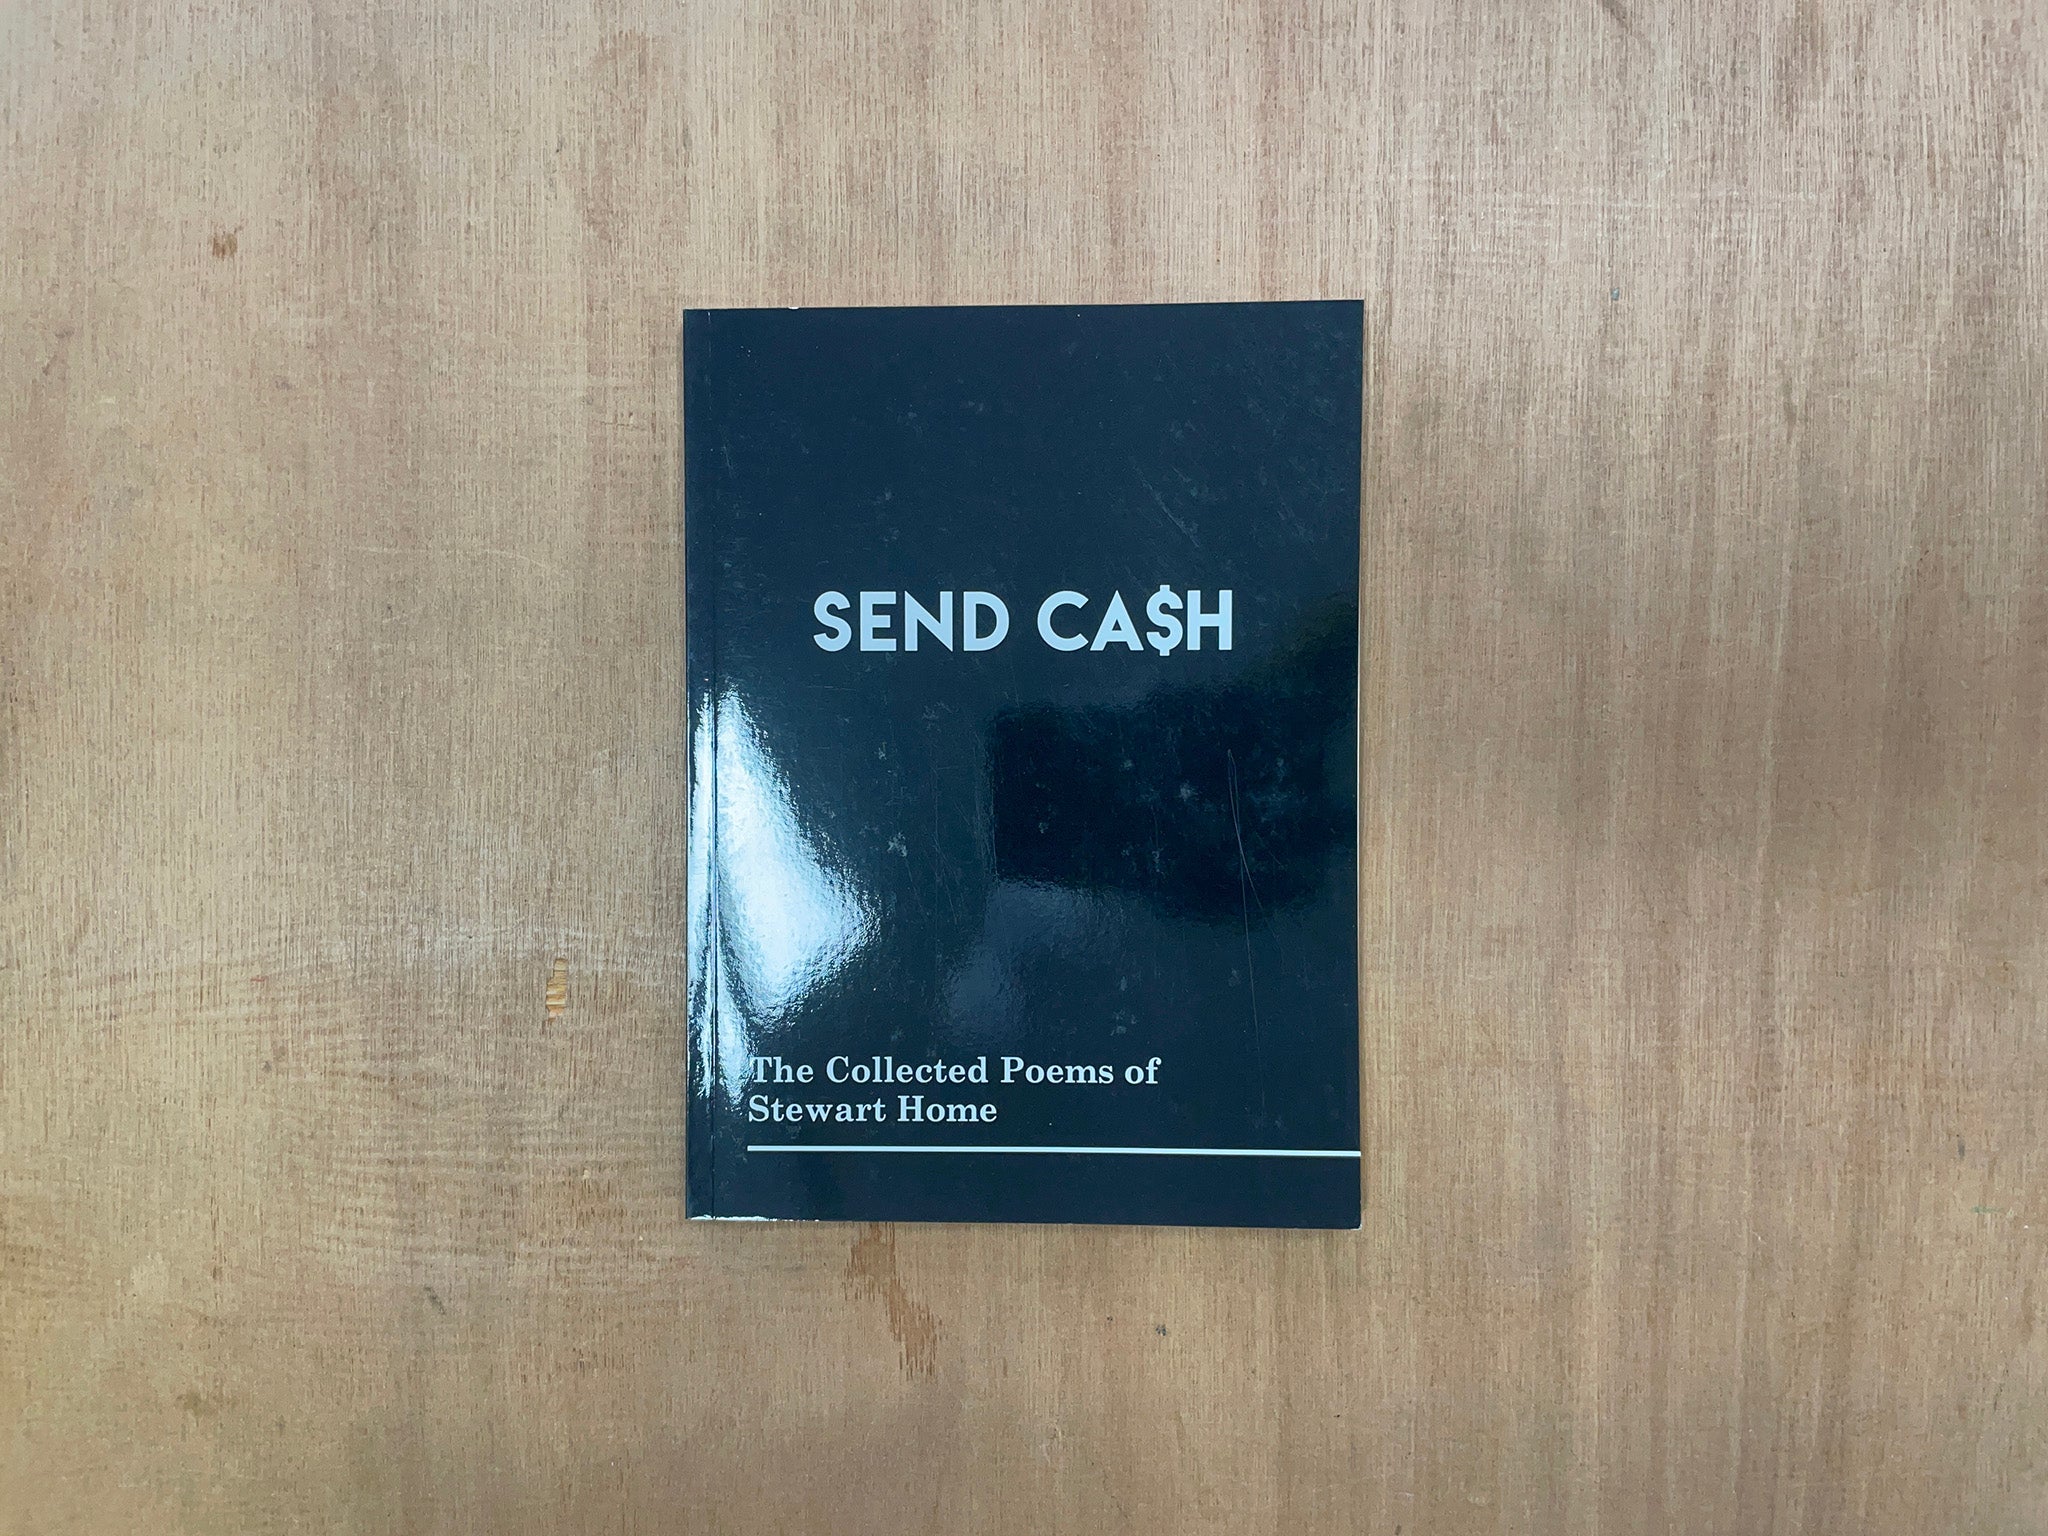 SEND CA$H: THE COLLECTED POEMS OF STEWART HOME by Stewart Home